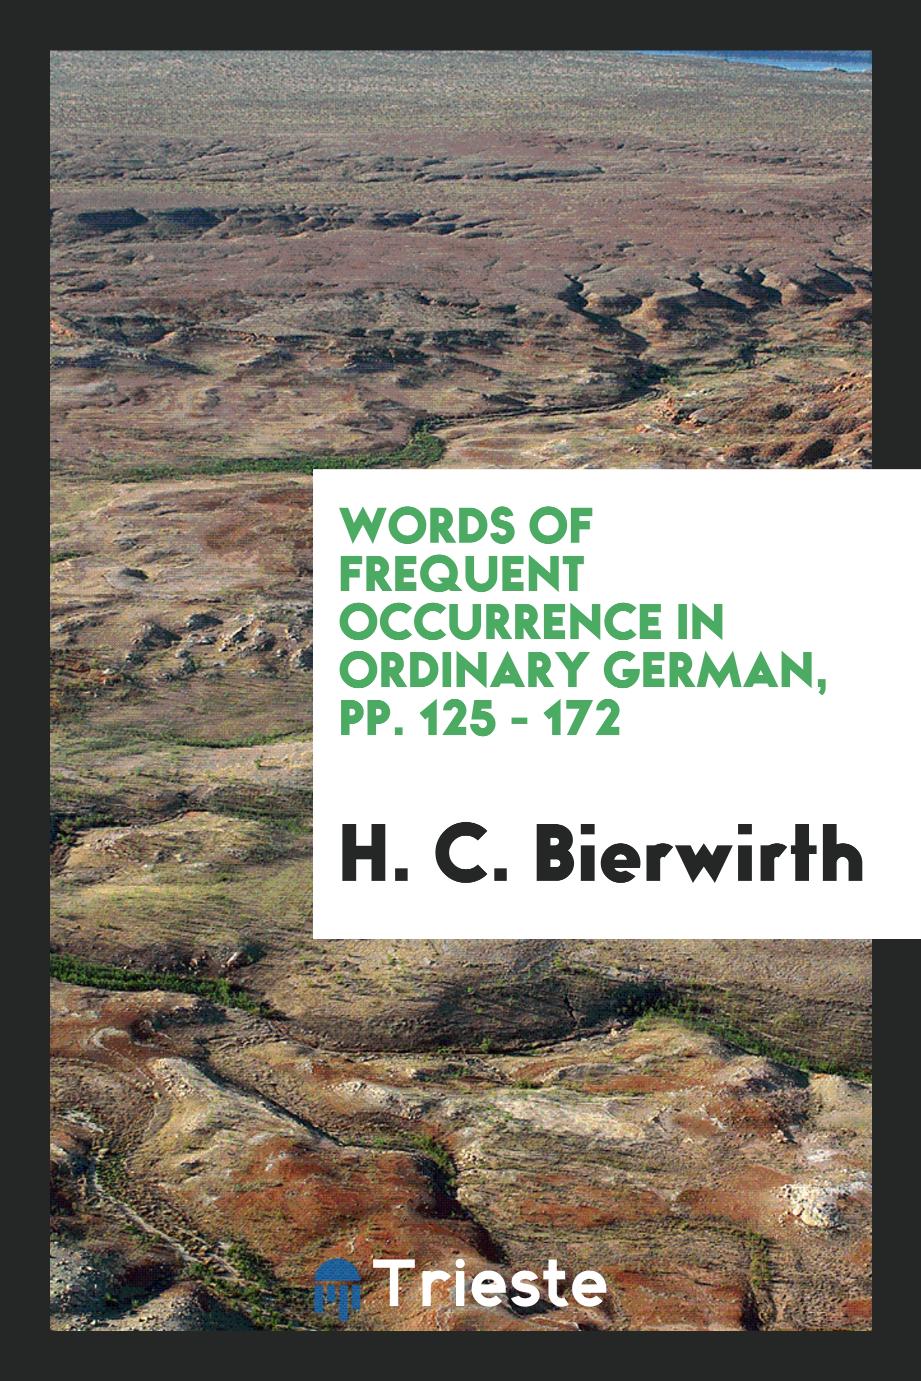 Words of Frequent Occurrence in Ordinary German, pp. 125 - 172